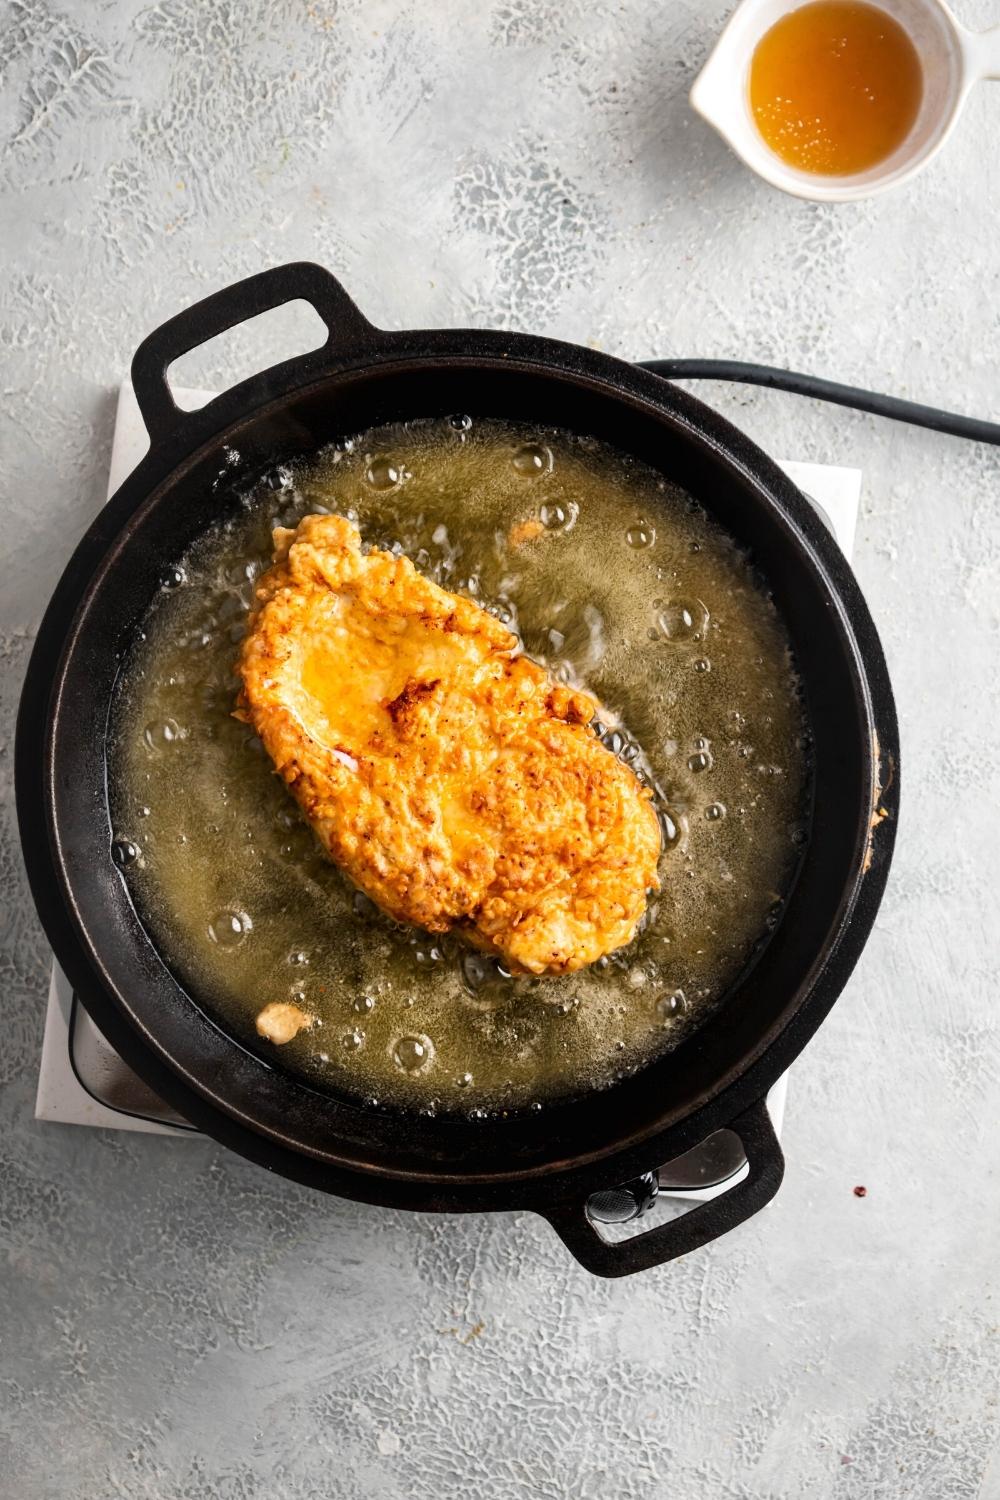 A piece of breaded chicken frying in a pan filled with oil.